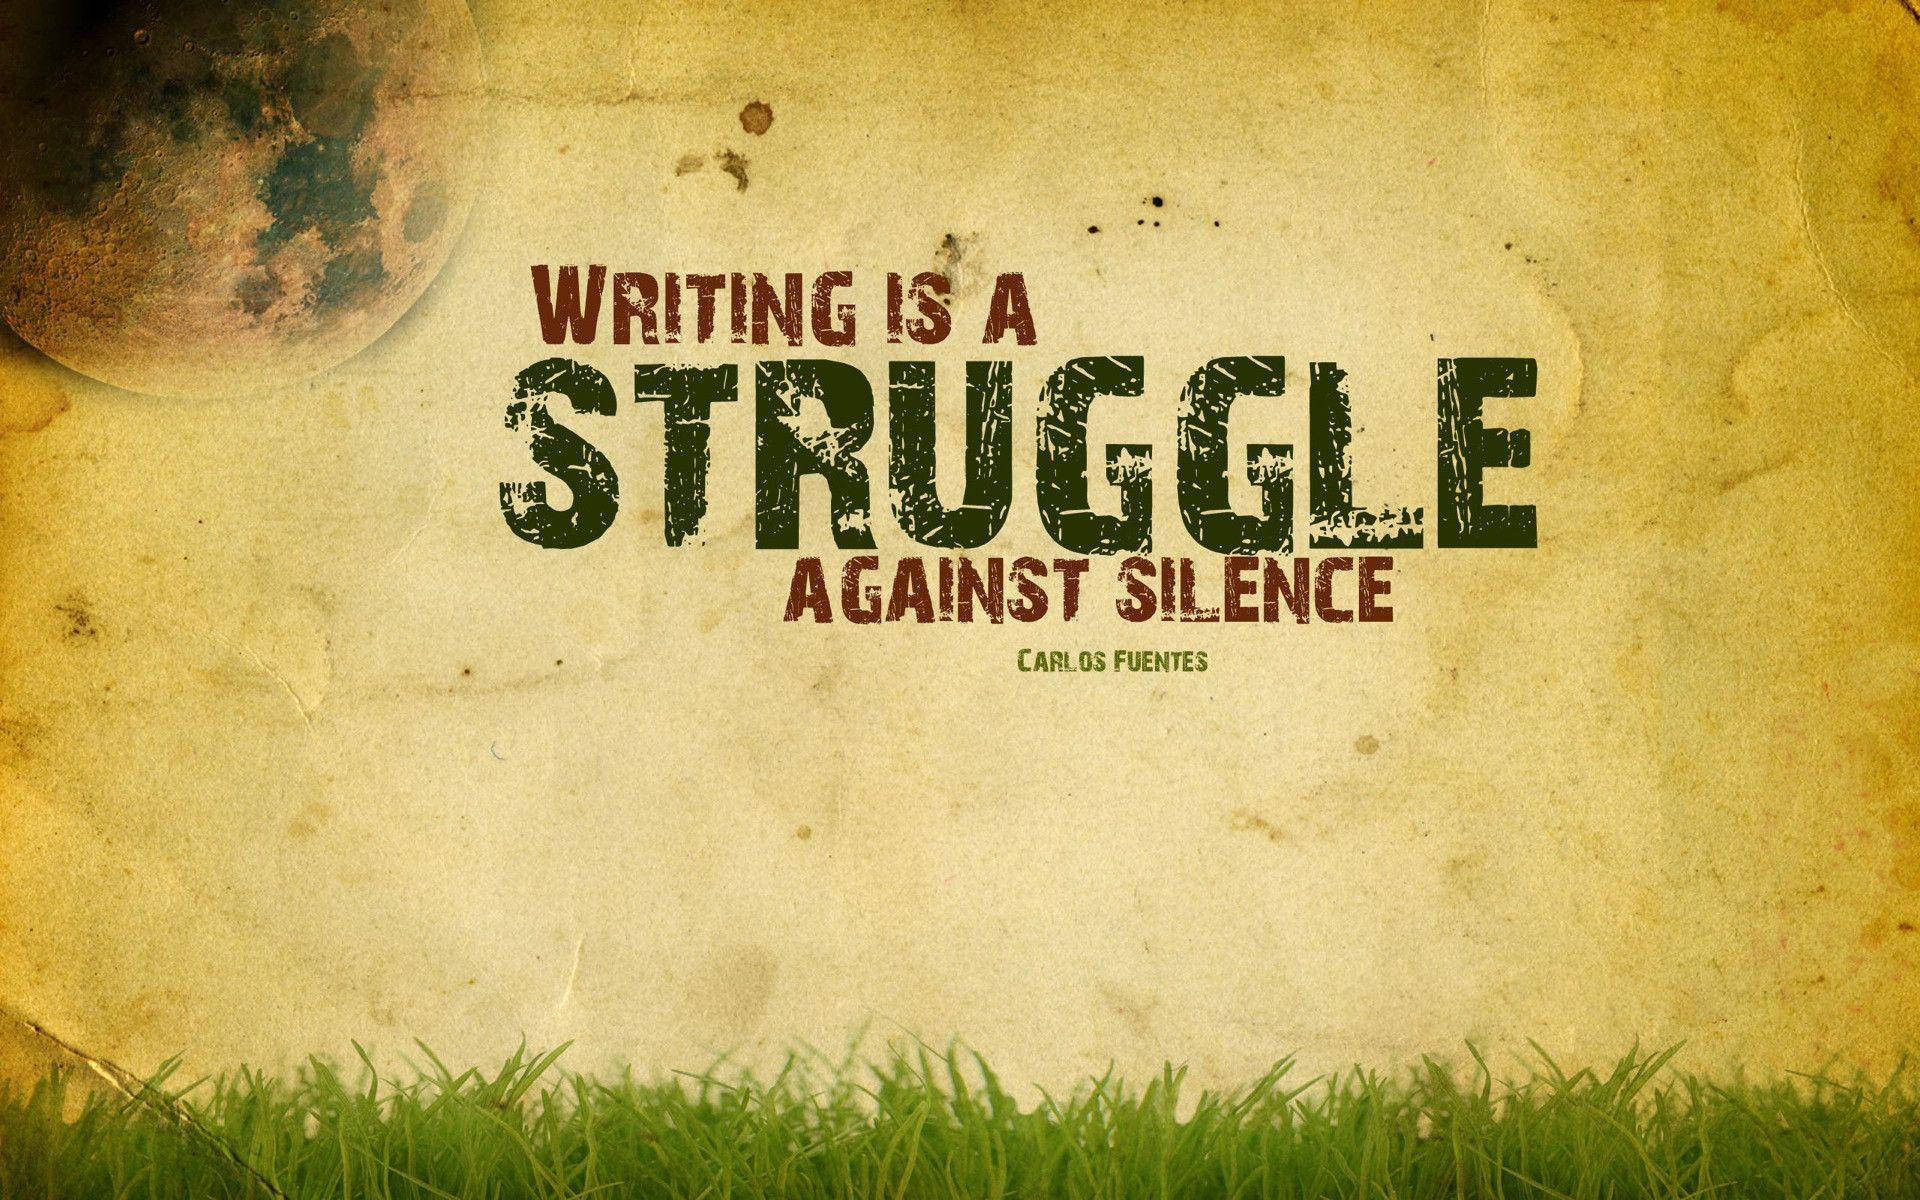 Inspirational Quotes About Writing Background